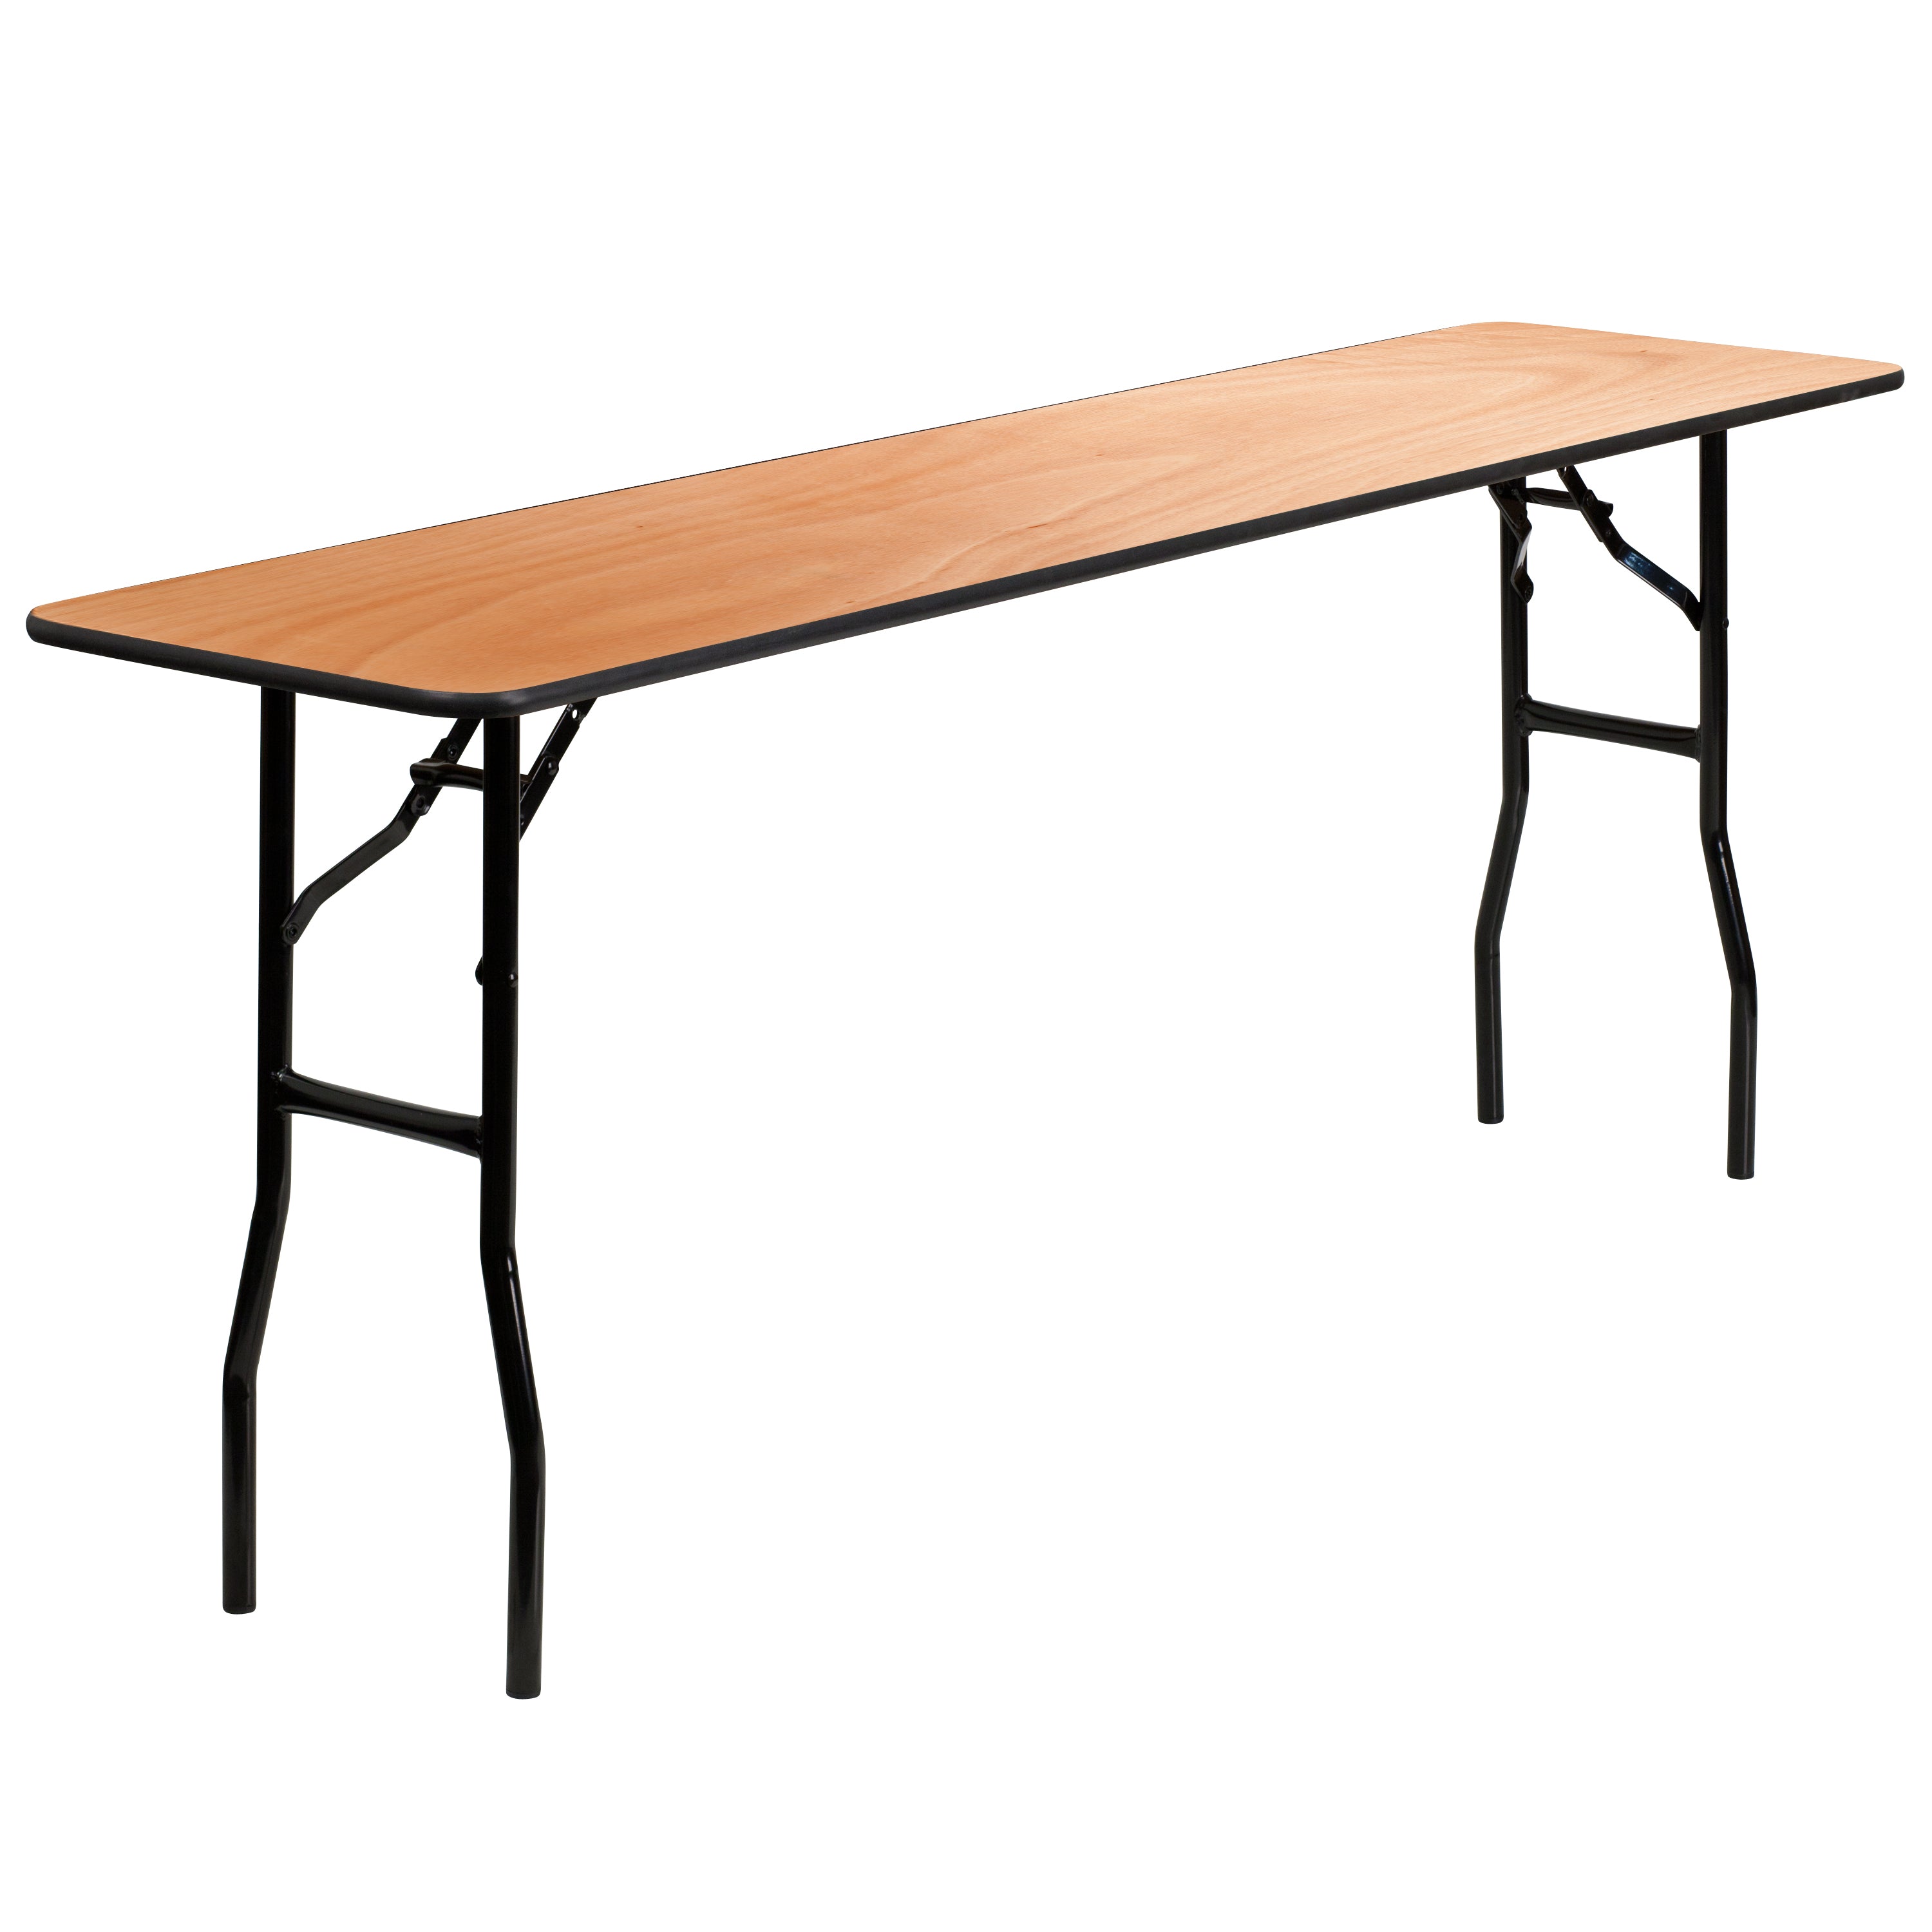 6-Foot Rectangular Wood Folding Training / Seminar Table with Smooth Clear Coated Finished Top-Rectangular Folding Table-Flash Furniture-Wall2Wall Furnishings